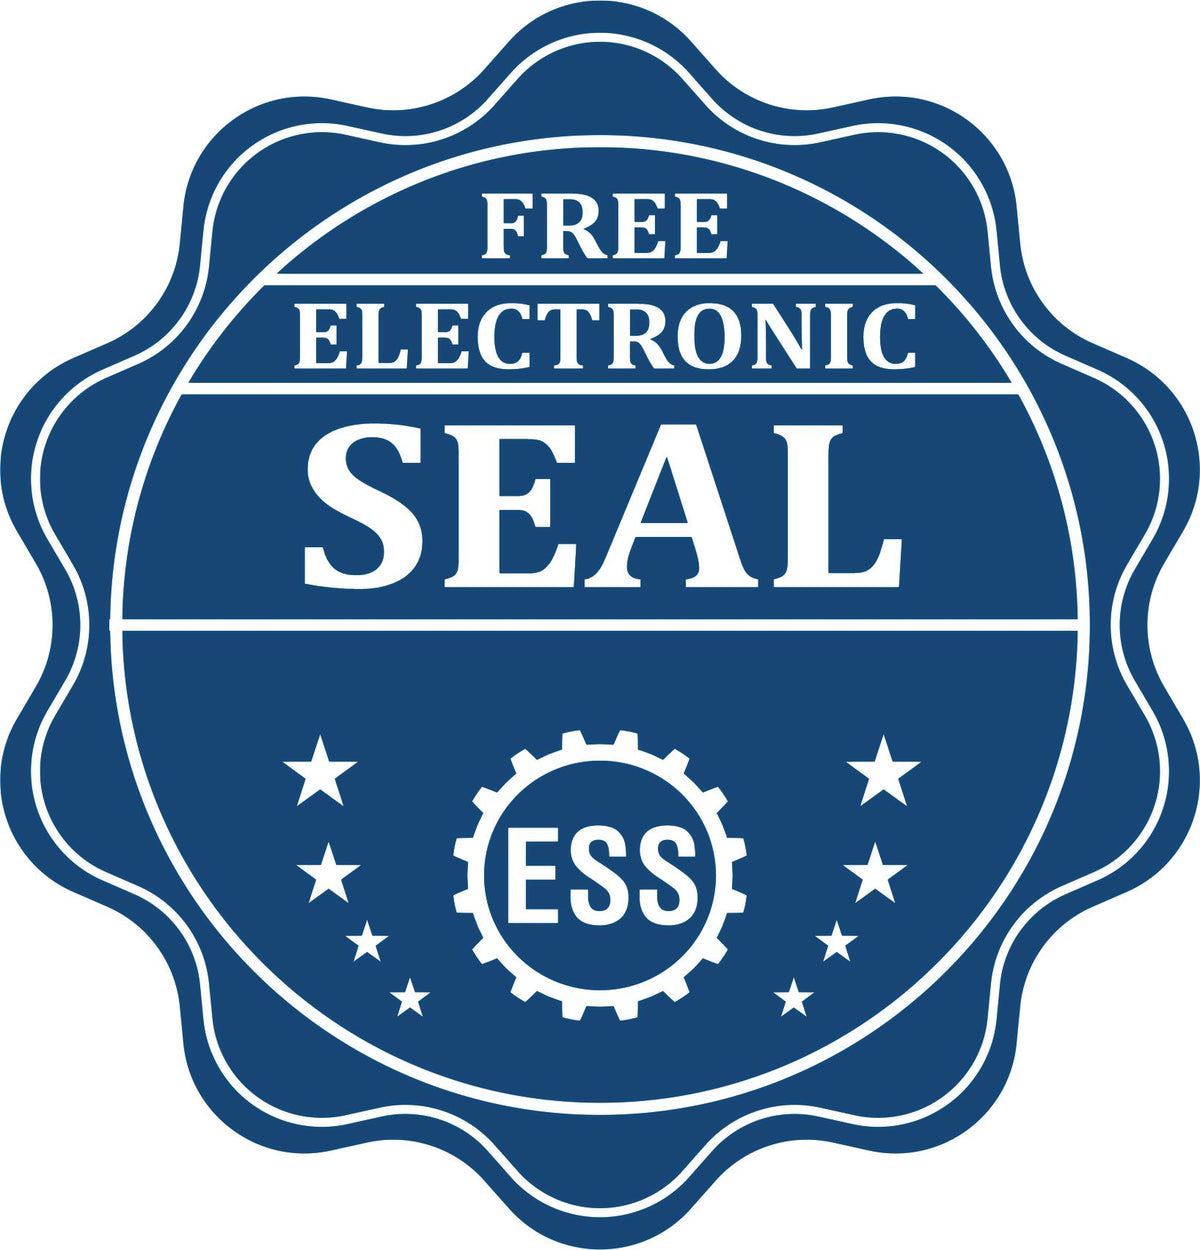 A badge showing a free electronic seal for the Gift Illinois Engineer Seal with stars and the ESS gear on the emblem.